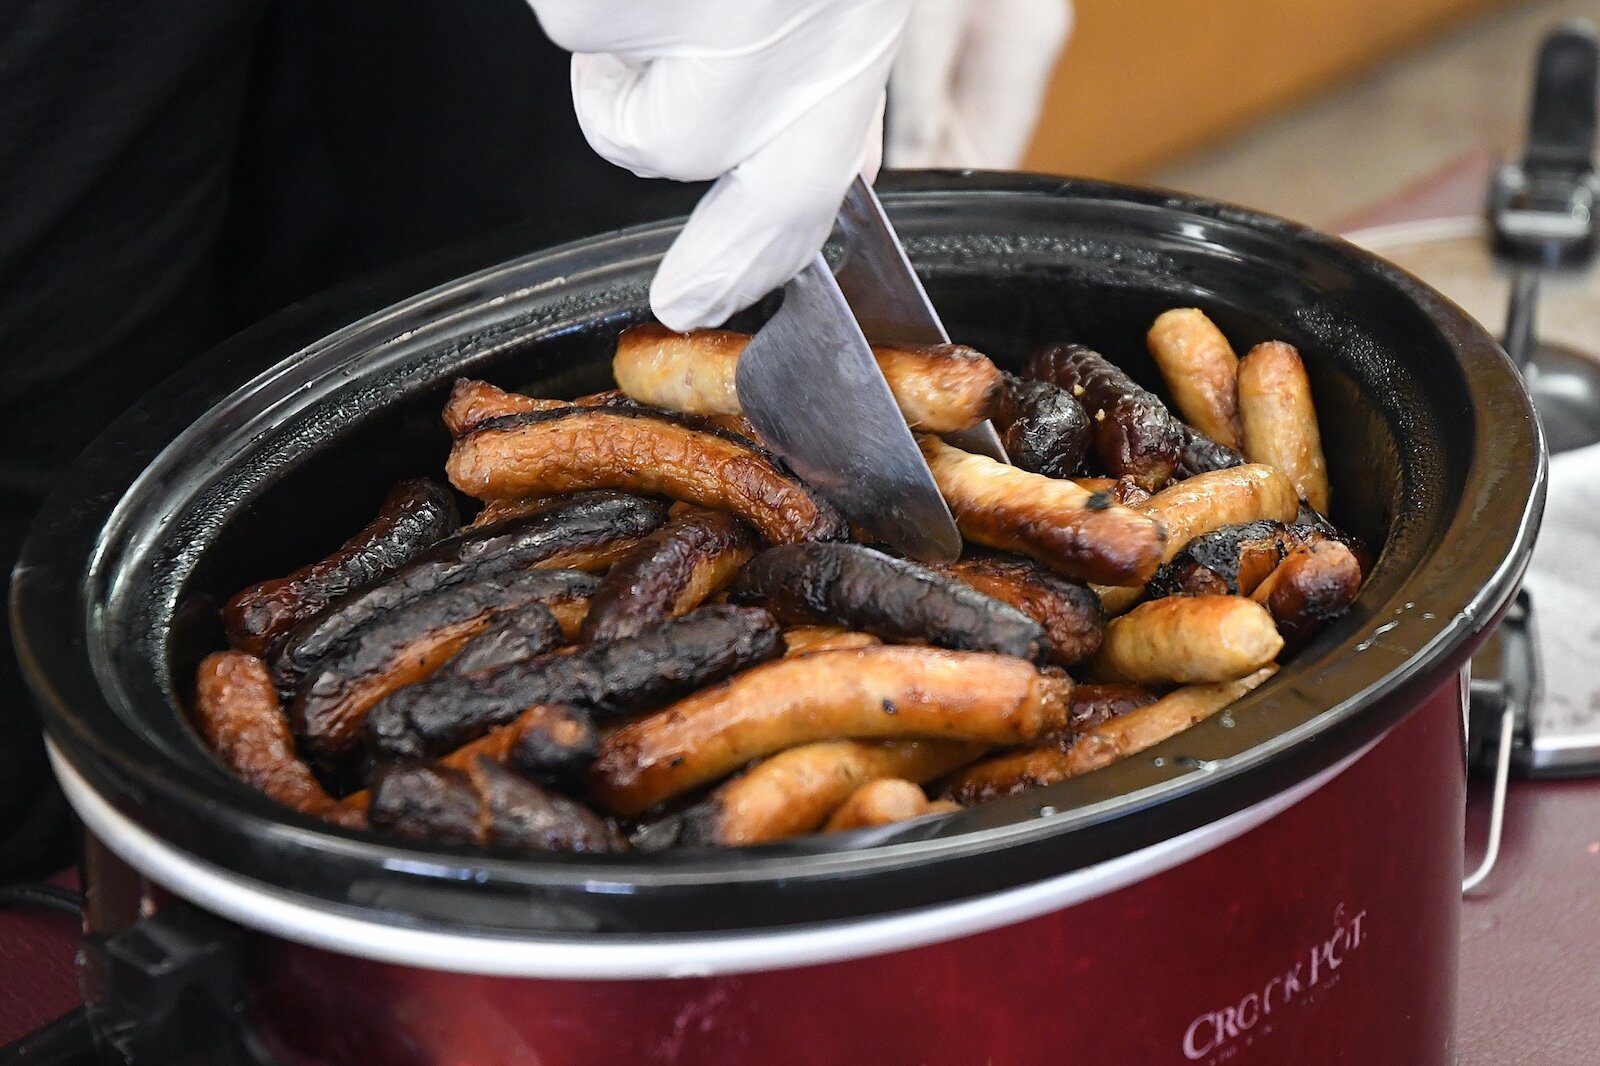 Sausages for every taste are served at St. Thomas Episcopal Church’s breakfast program